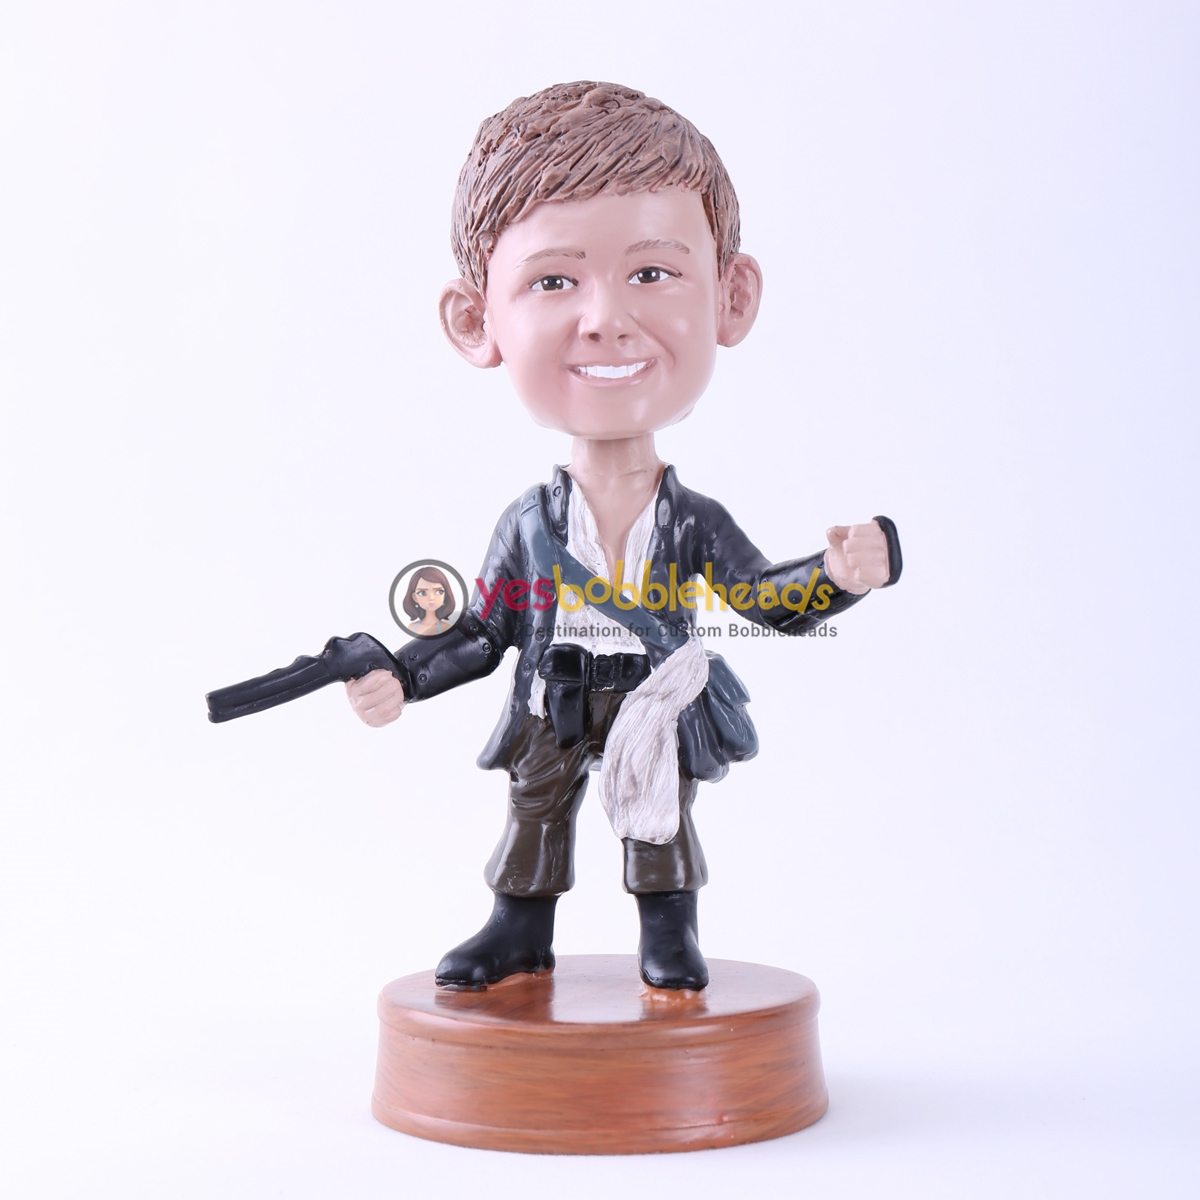 Picture of Custom Bobblehead Doll: Billy the Child